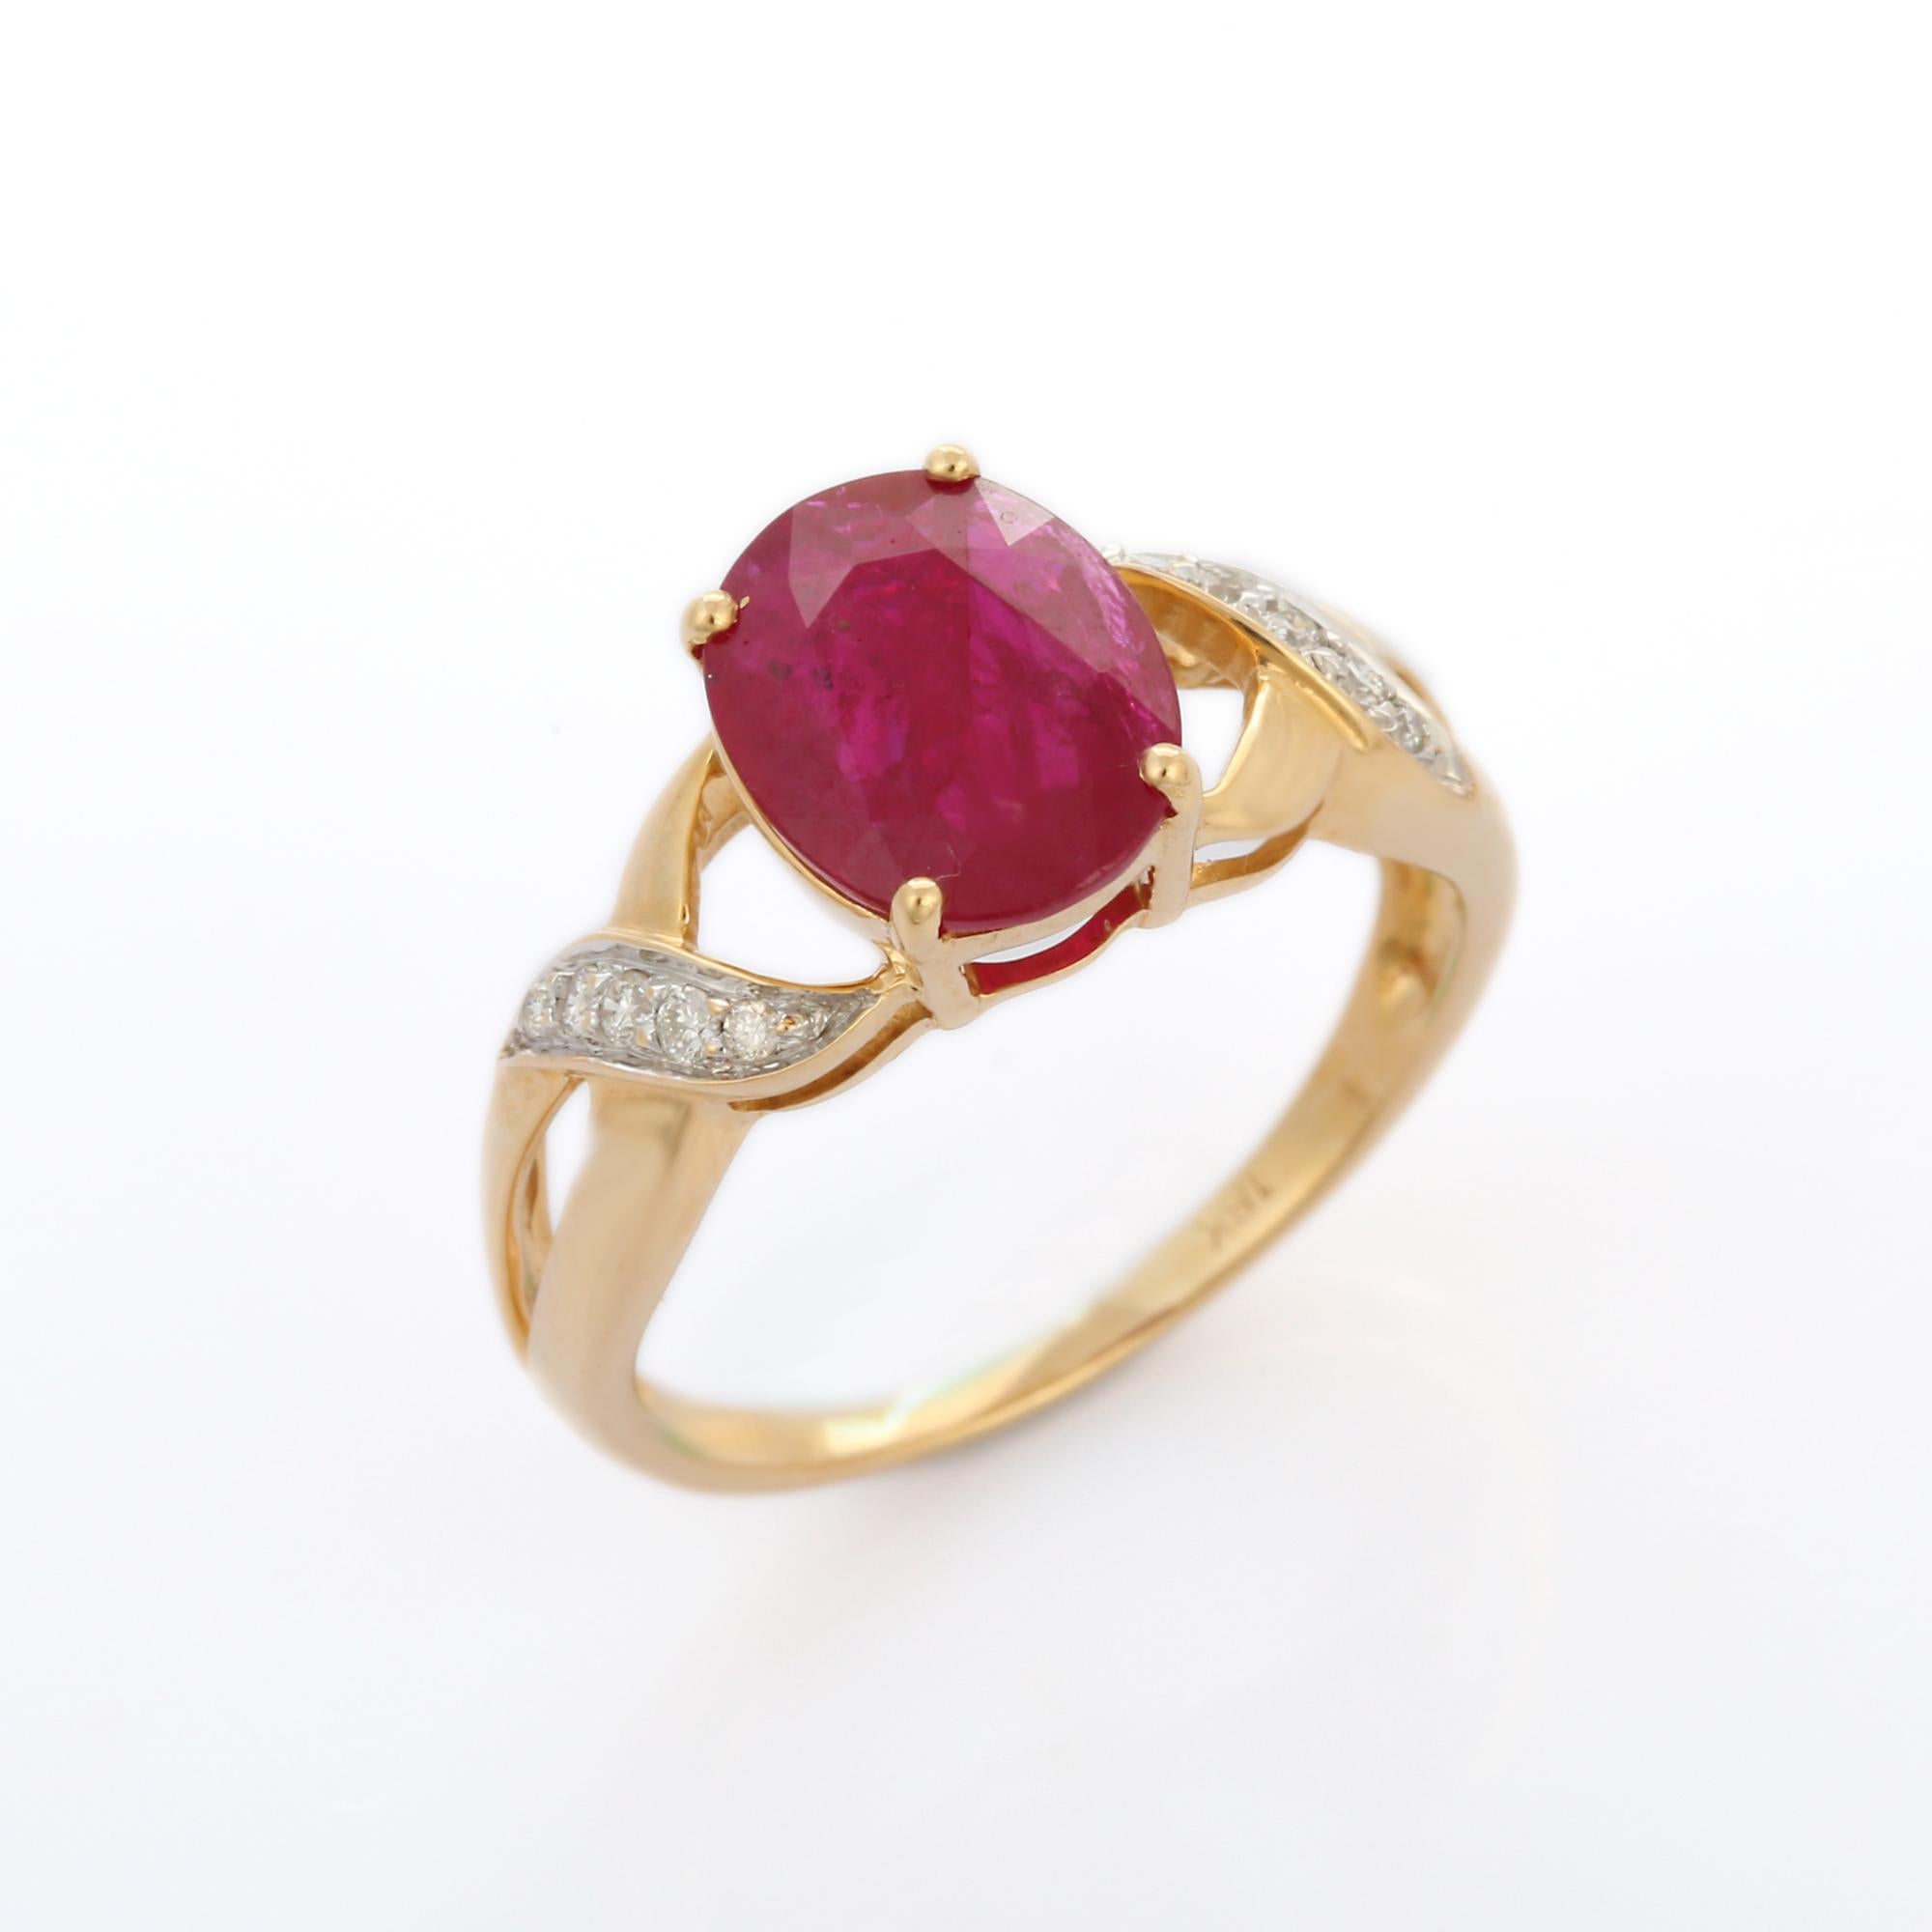 For Sale:  2.28 Carat Ruby Side Wave Diamond Engagement Ring in 18K Yellow Gold 7